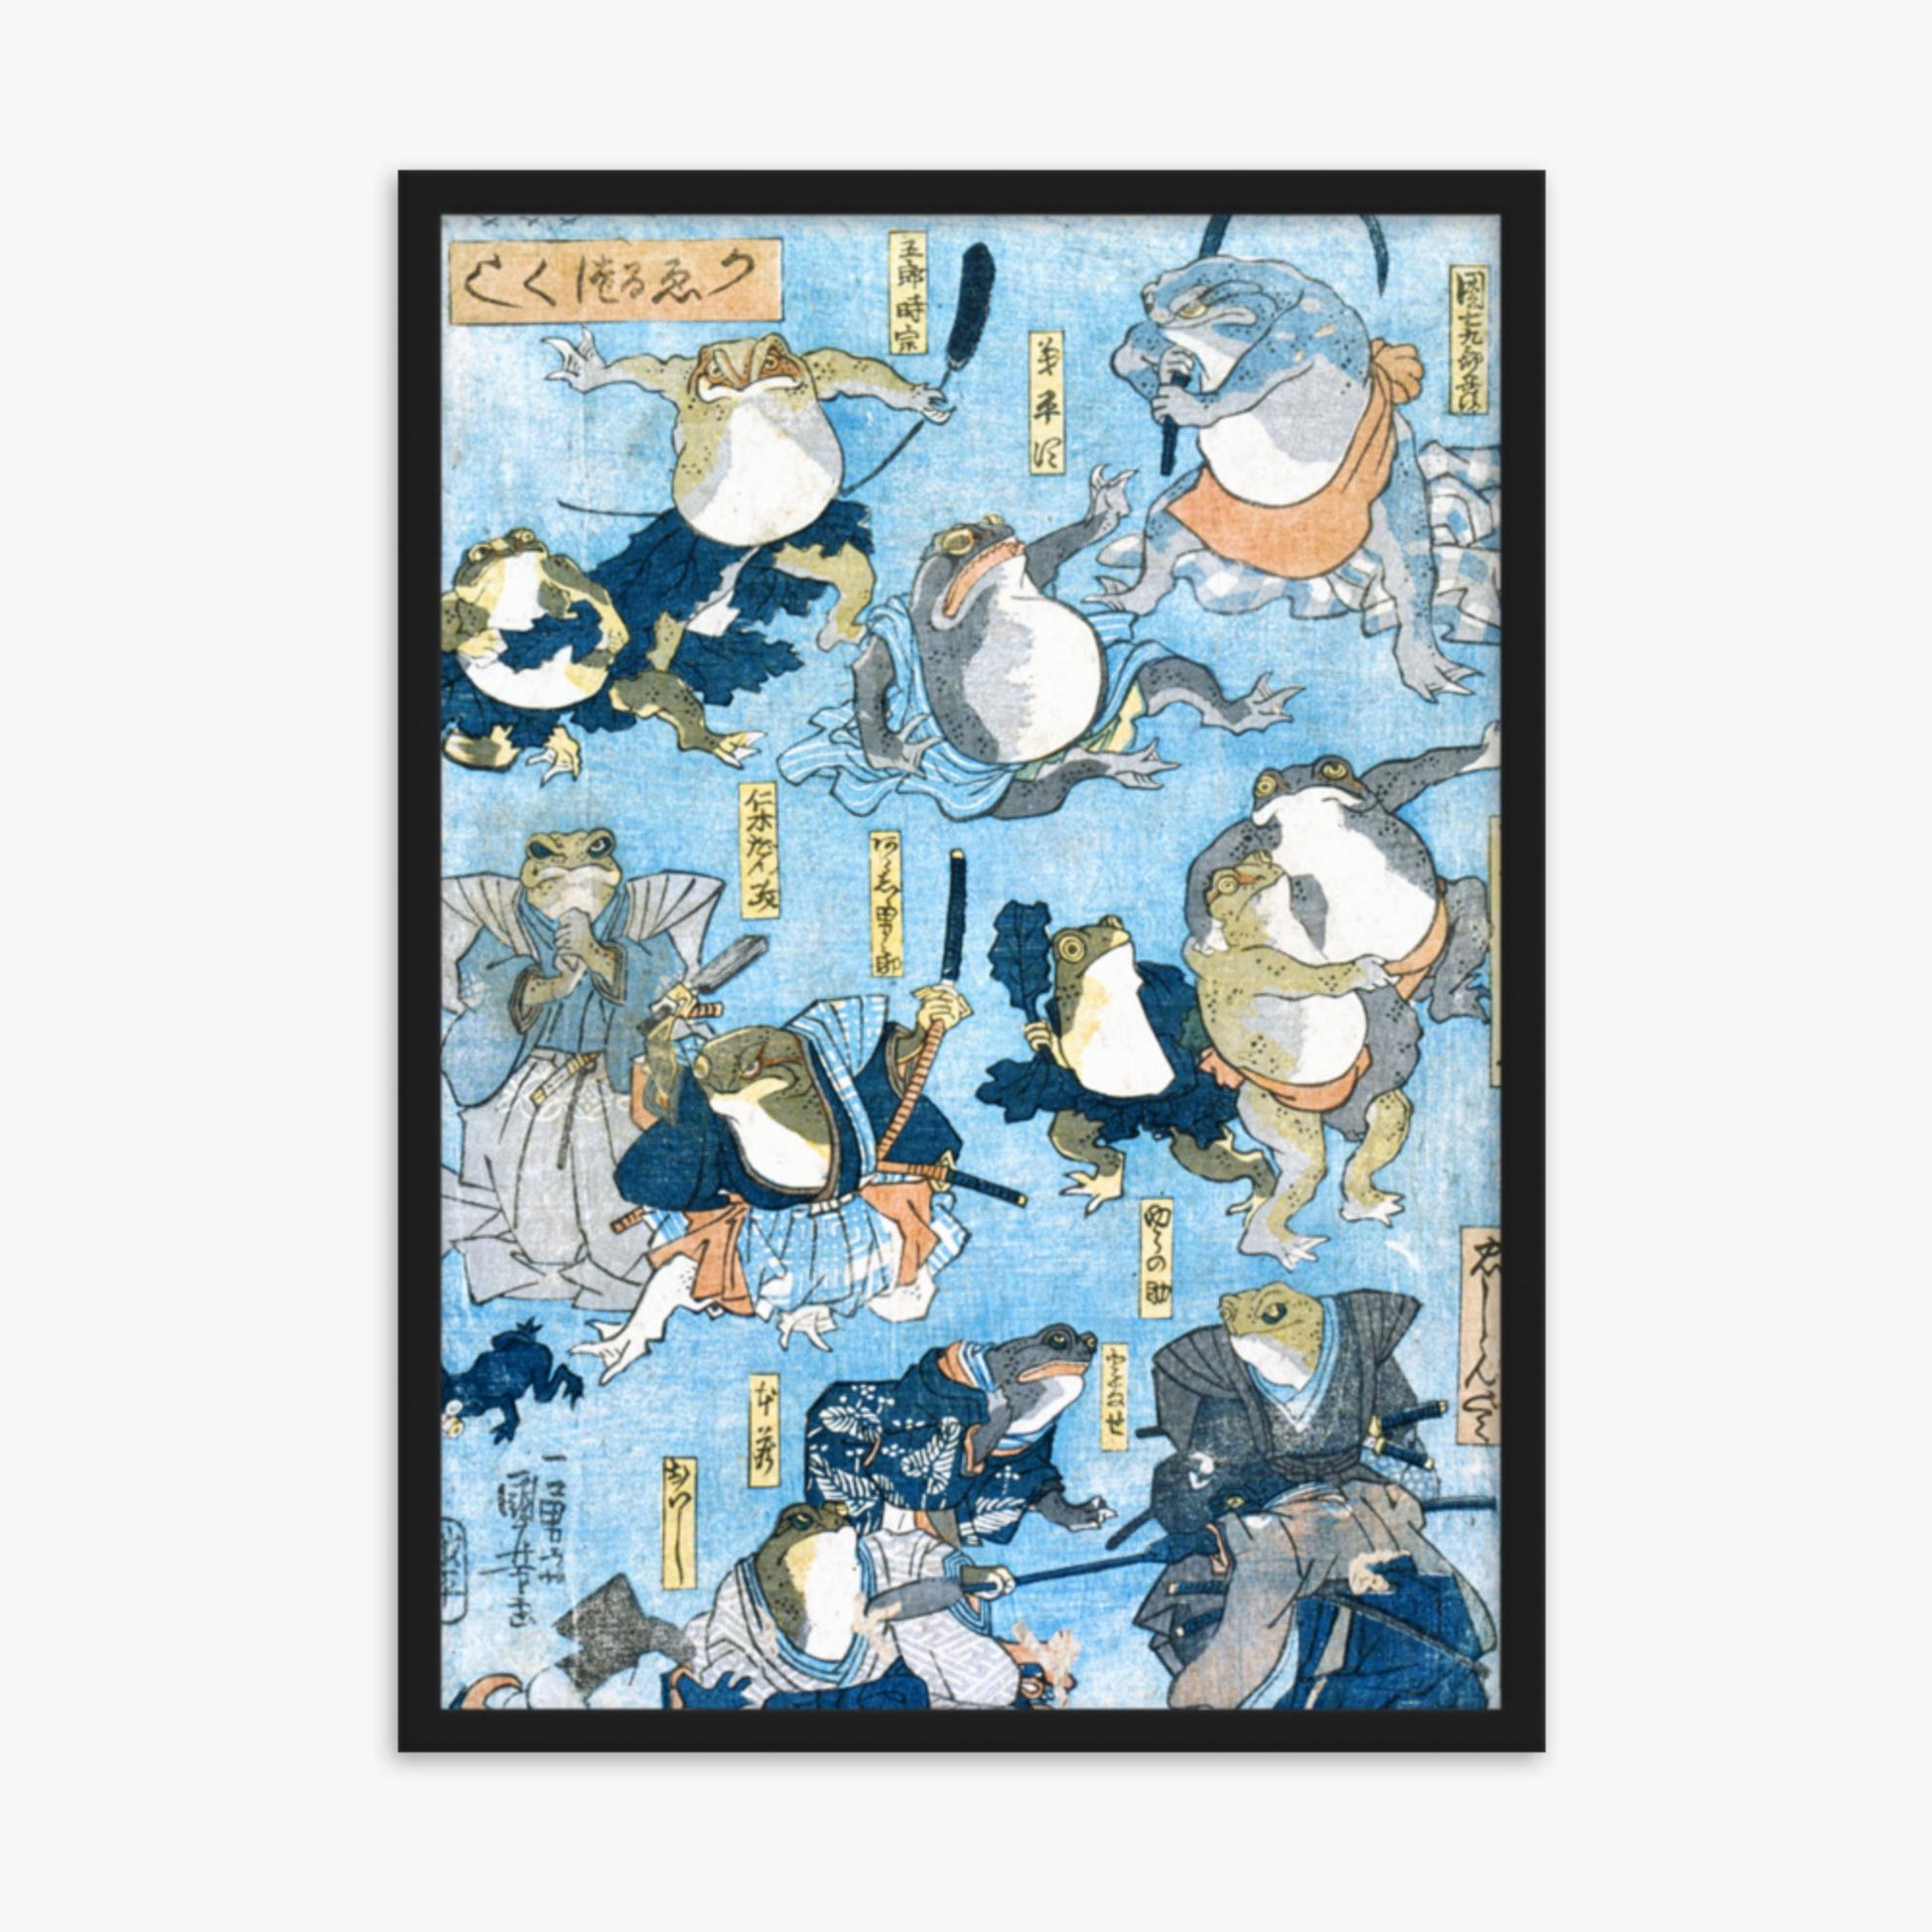 Utagawa Kuniyoshi - Famous Heroes of the Kabuki Stage Played by Frogs  50x70 cm Poster With Black Frame